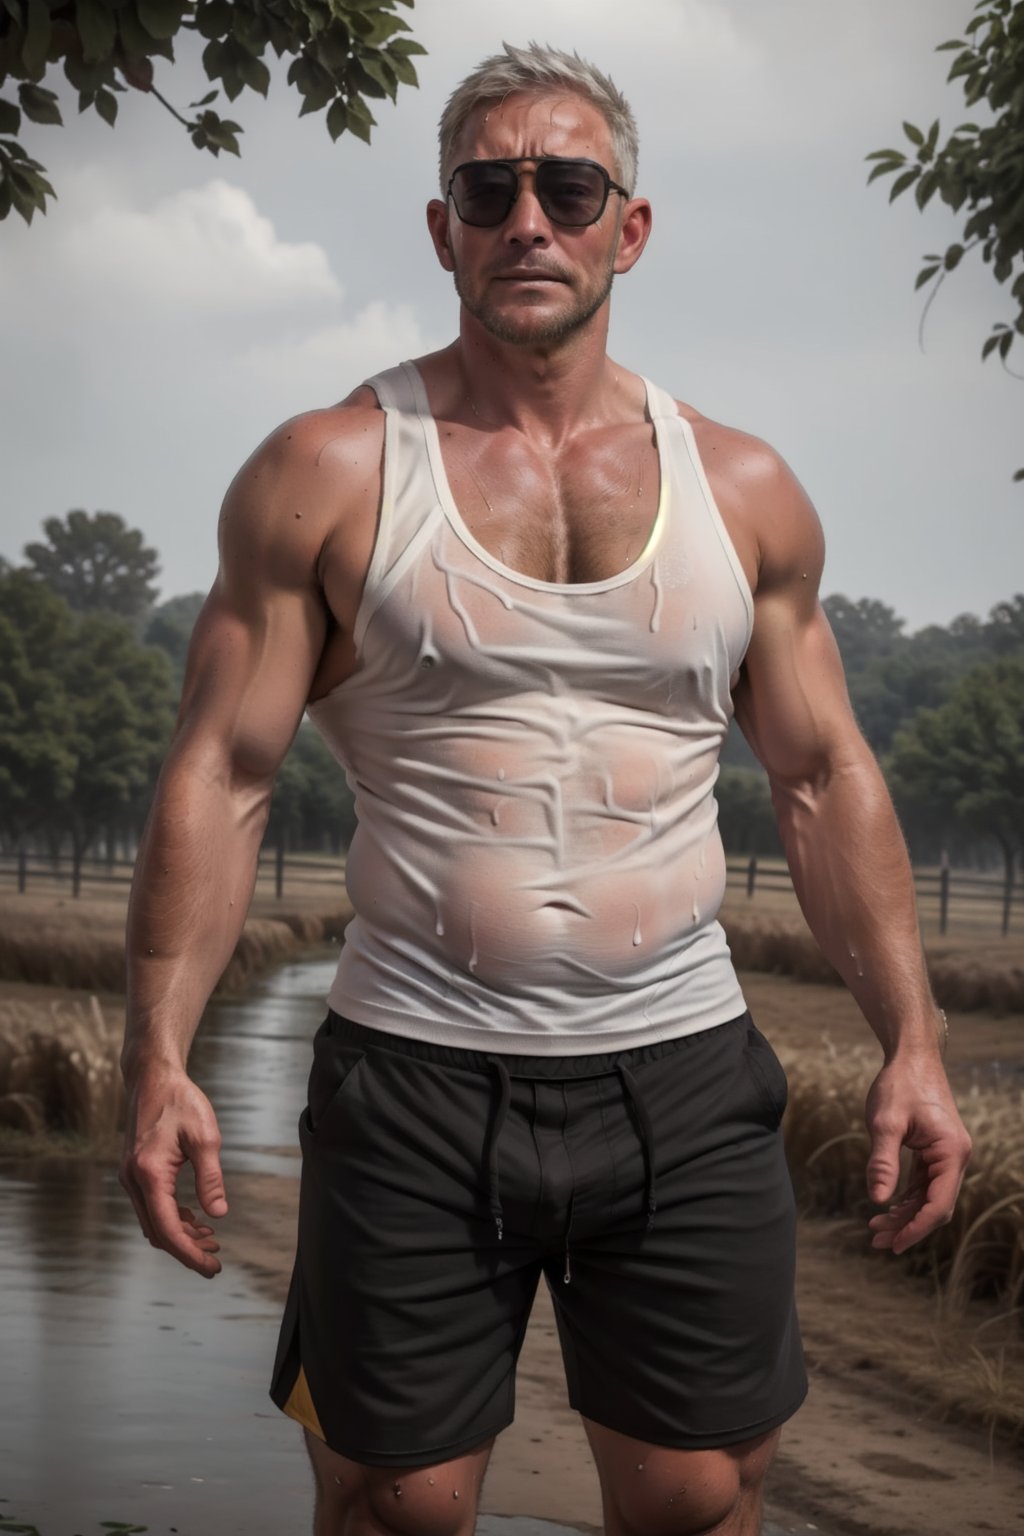 ((realistic)) ,65 years old, 185cm, 45kg, 10% body fats, handsome, man ,( tan_body), sunglasses, ((sweating)), farm, farmer, outdoor, (white tank_top), shorts, dark_skin, mature ,body_hair, furry, wet_clothes, chubby,erect_shorts